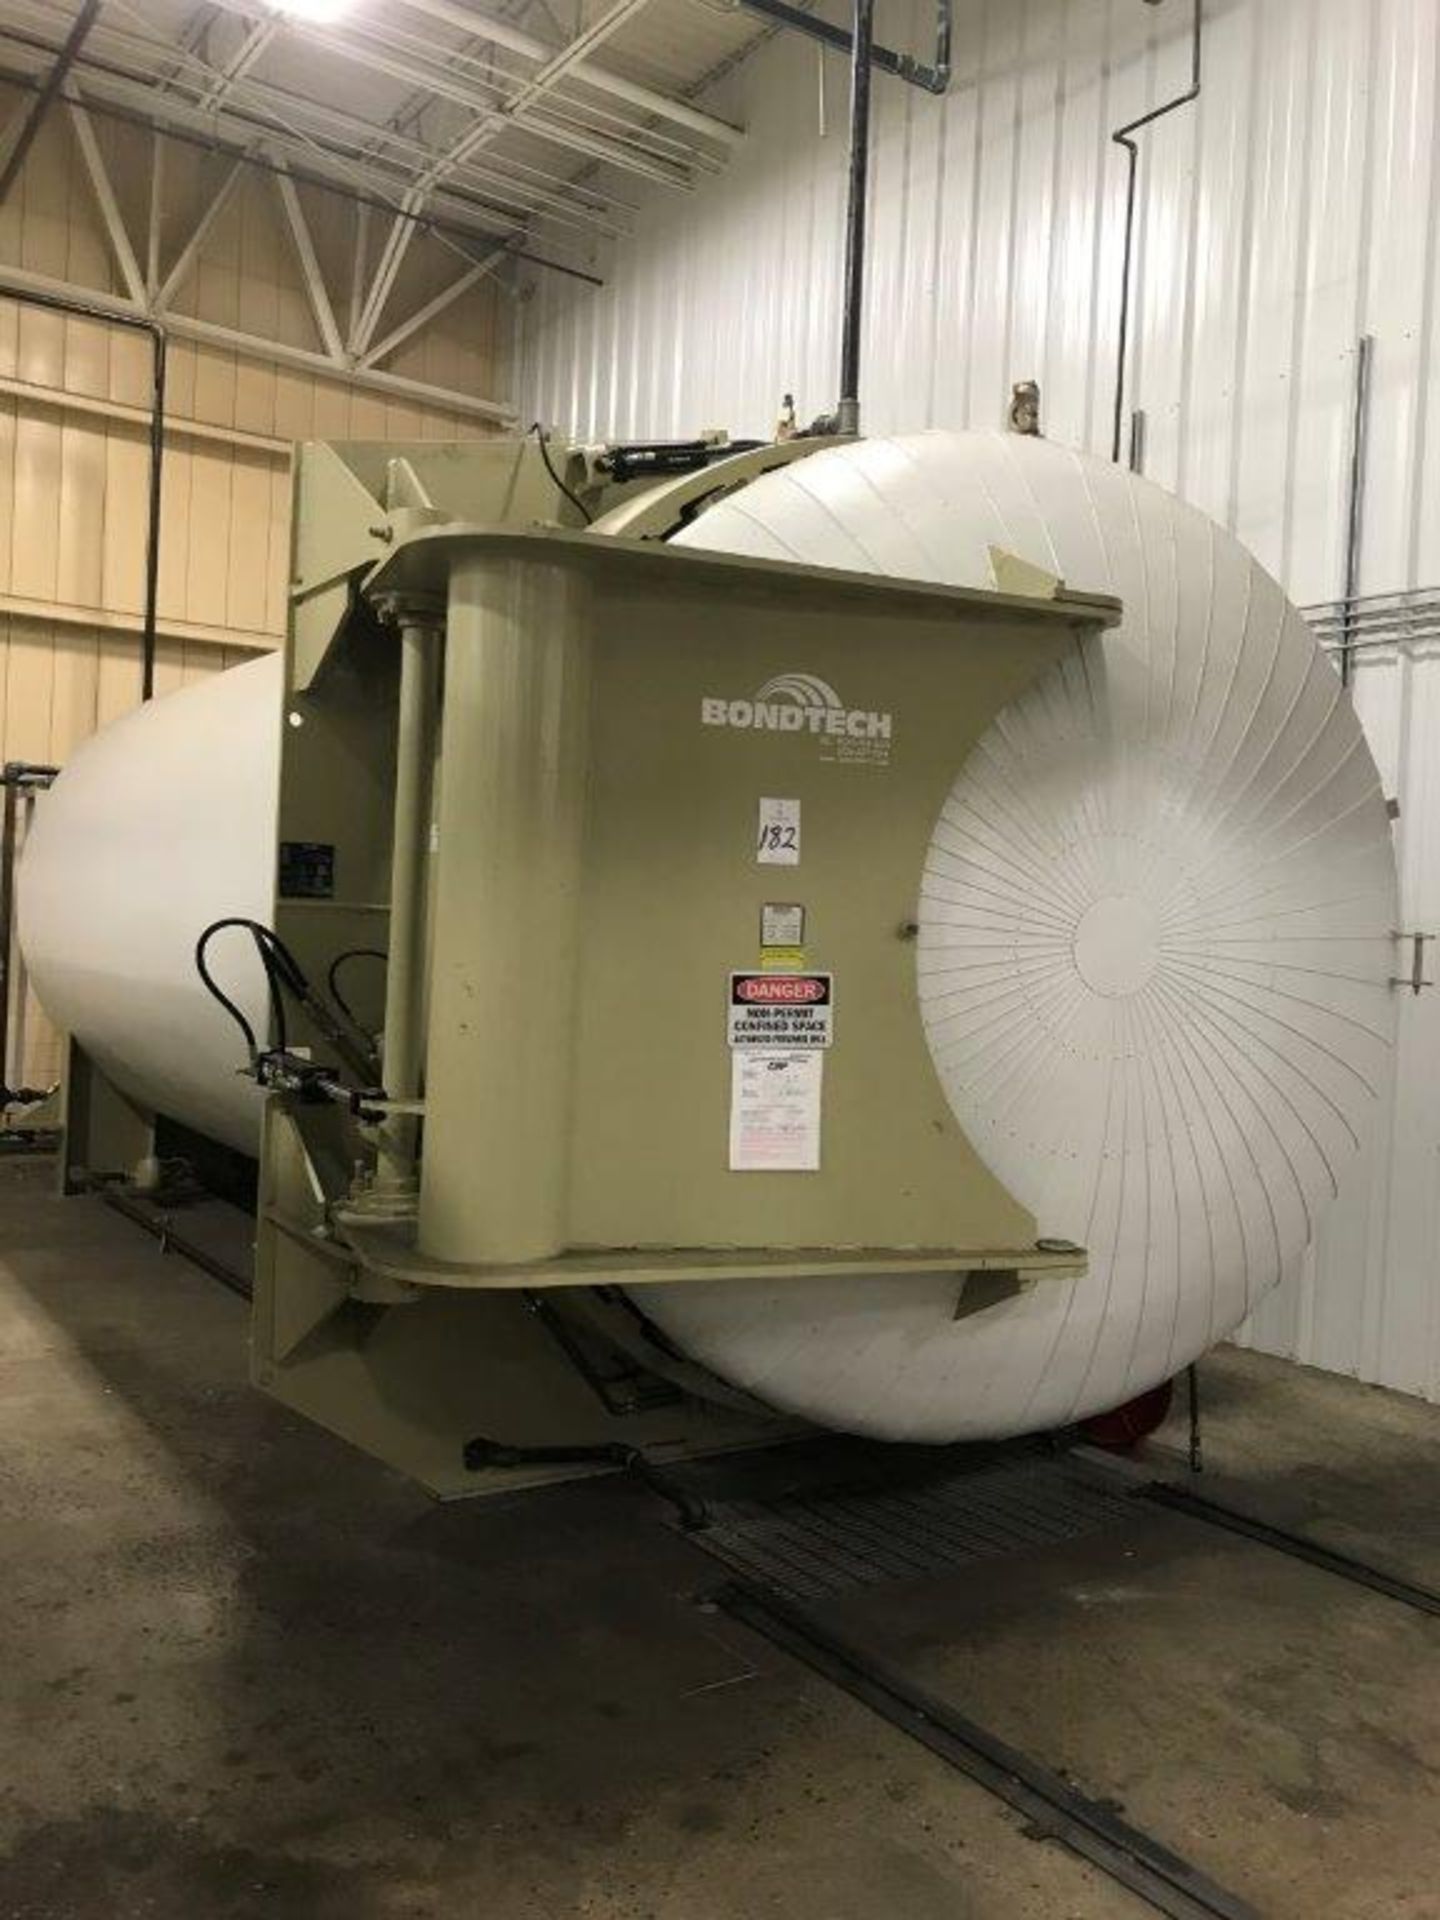 Bond Tech 15562, 9' x 20' L Autoclave S/N: 15562-111517-1, 2017, with 1200 psi Hyd. Max, 150 psi Air